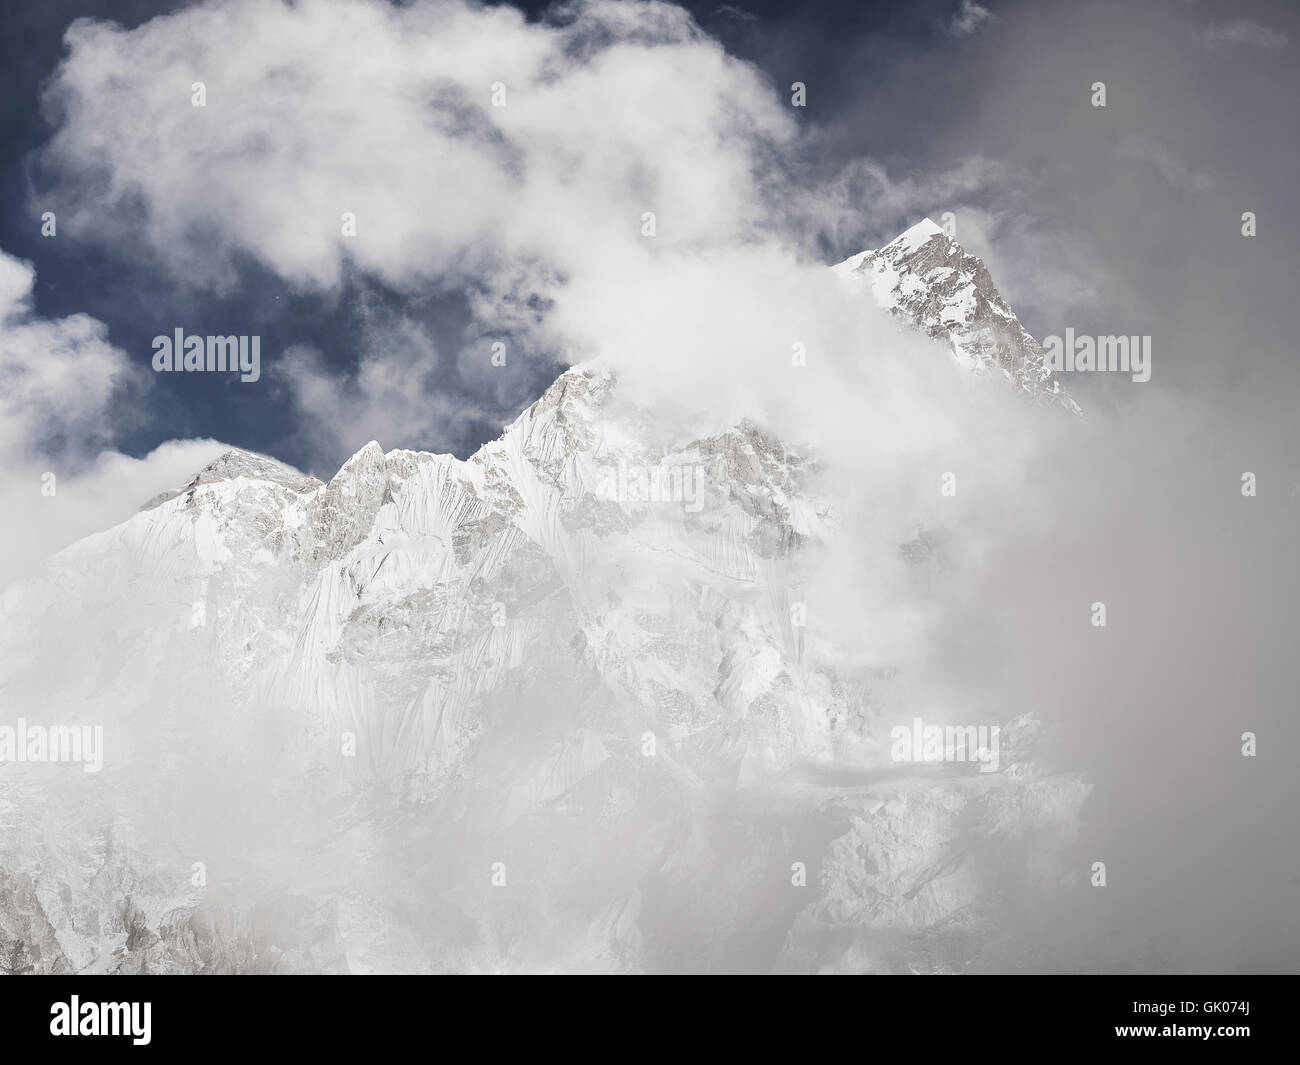 Cloud and snow covered peak seen from Nepal's Everest Base Camp Stock Photo